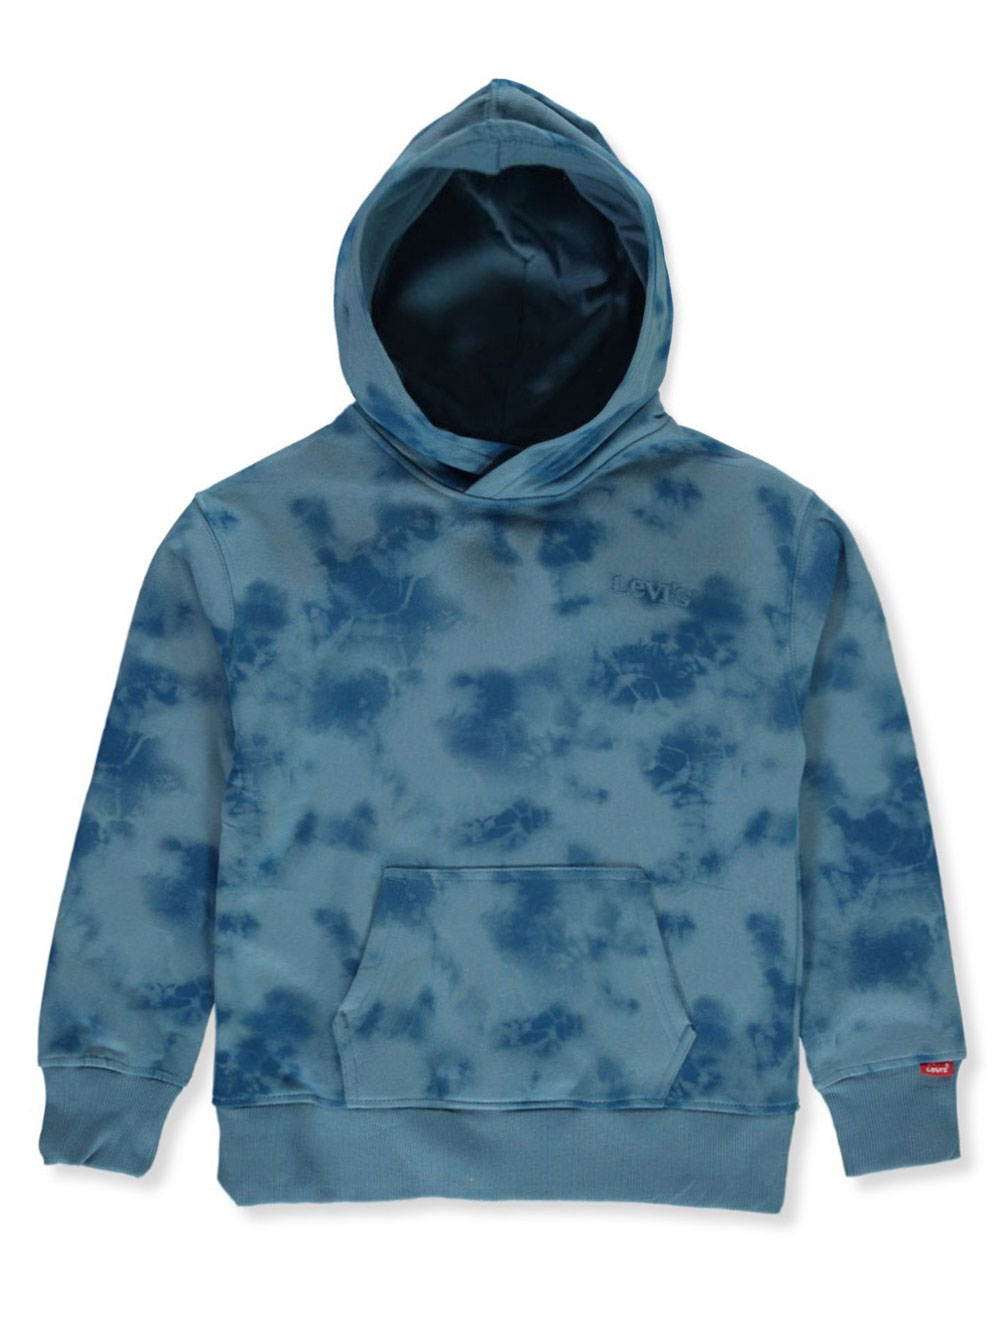 Blue and Multicolor Hoodies